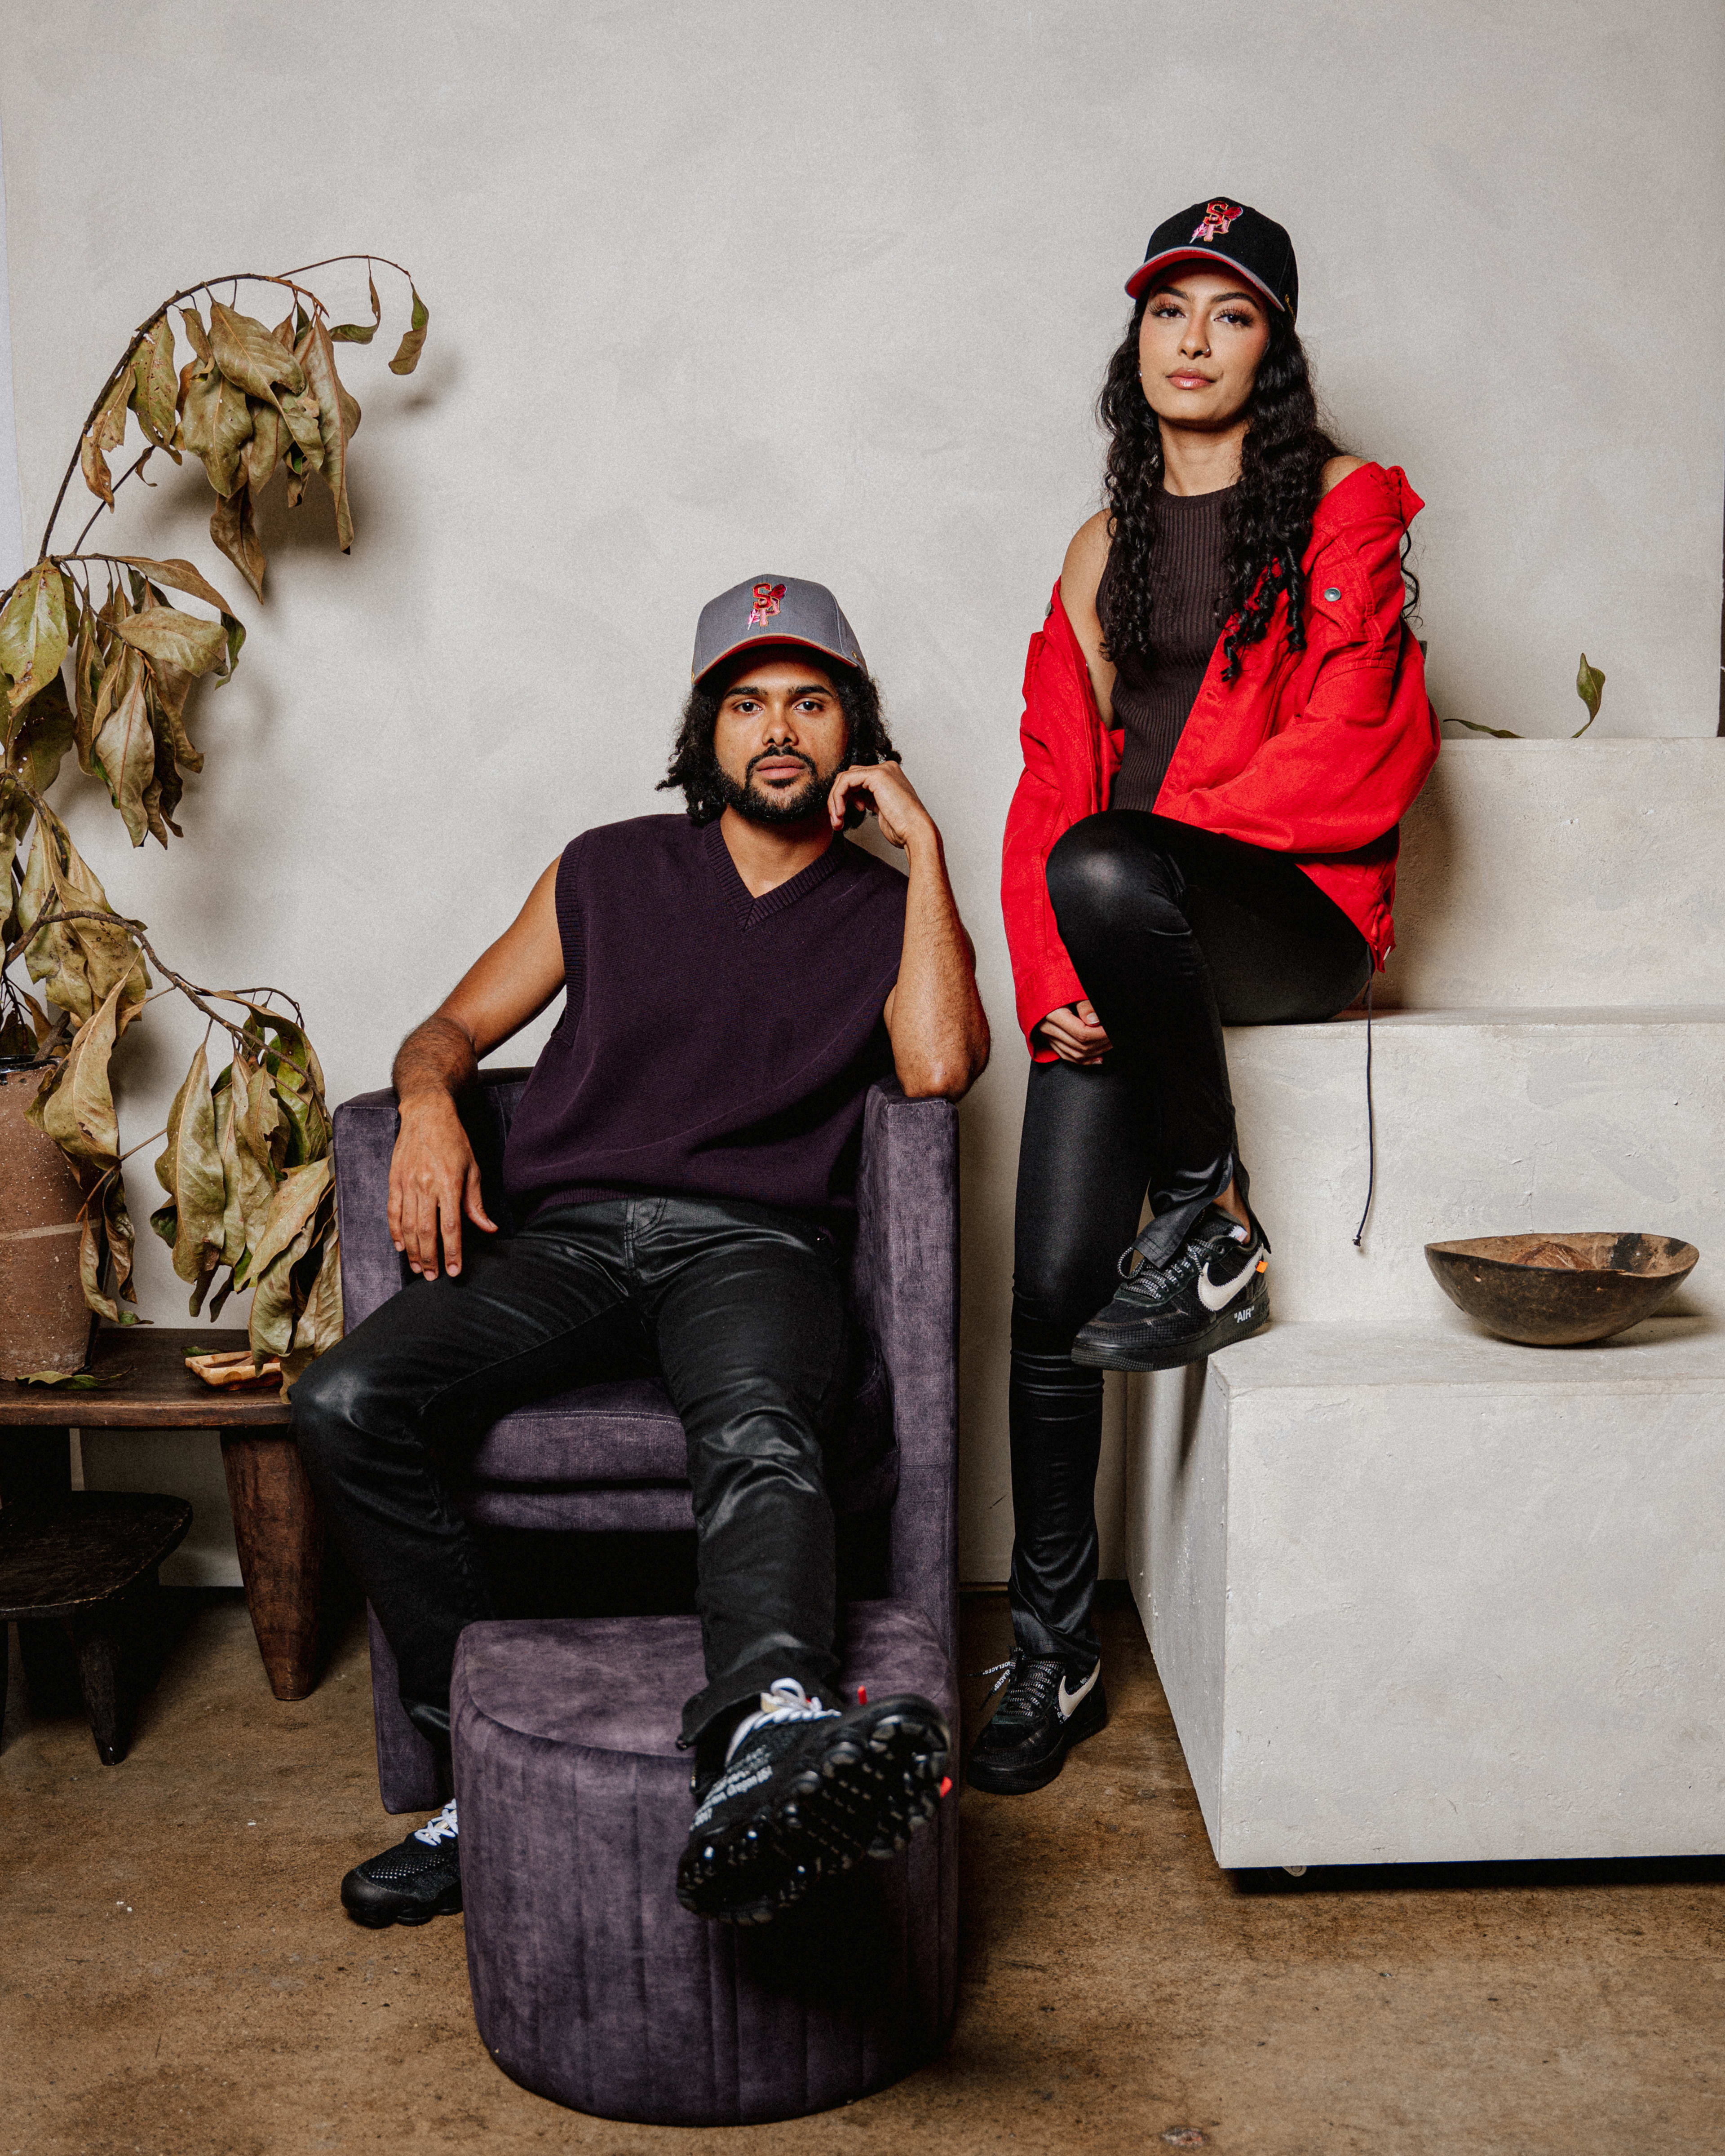 A rustic photoshoot with a man and a woman posing in baseball hats and black leather pants.